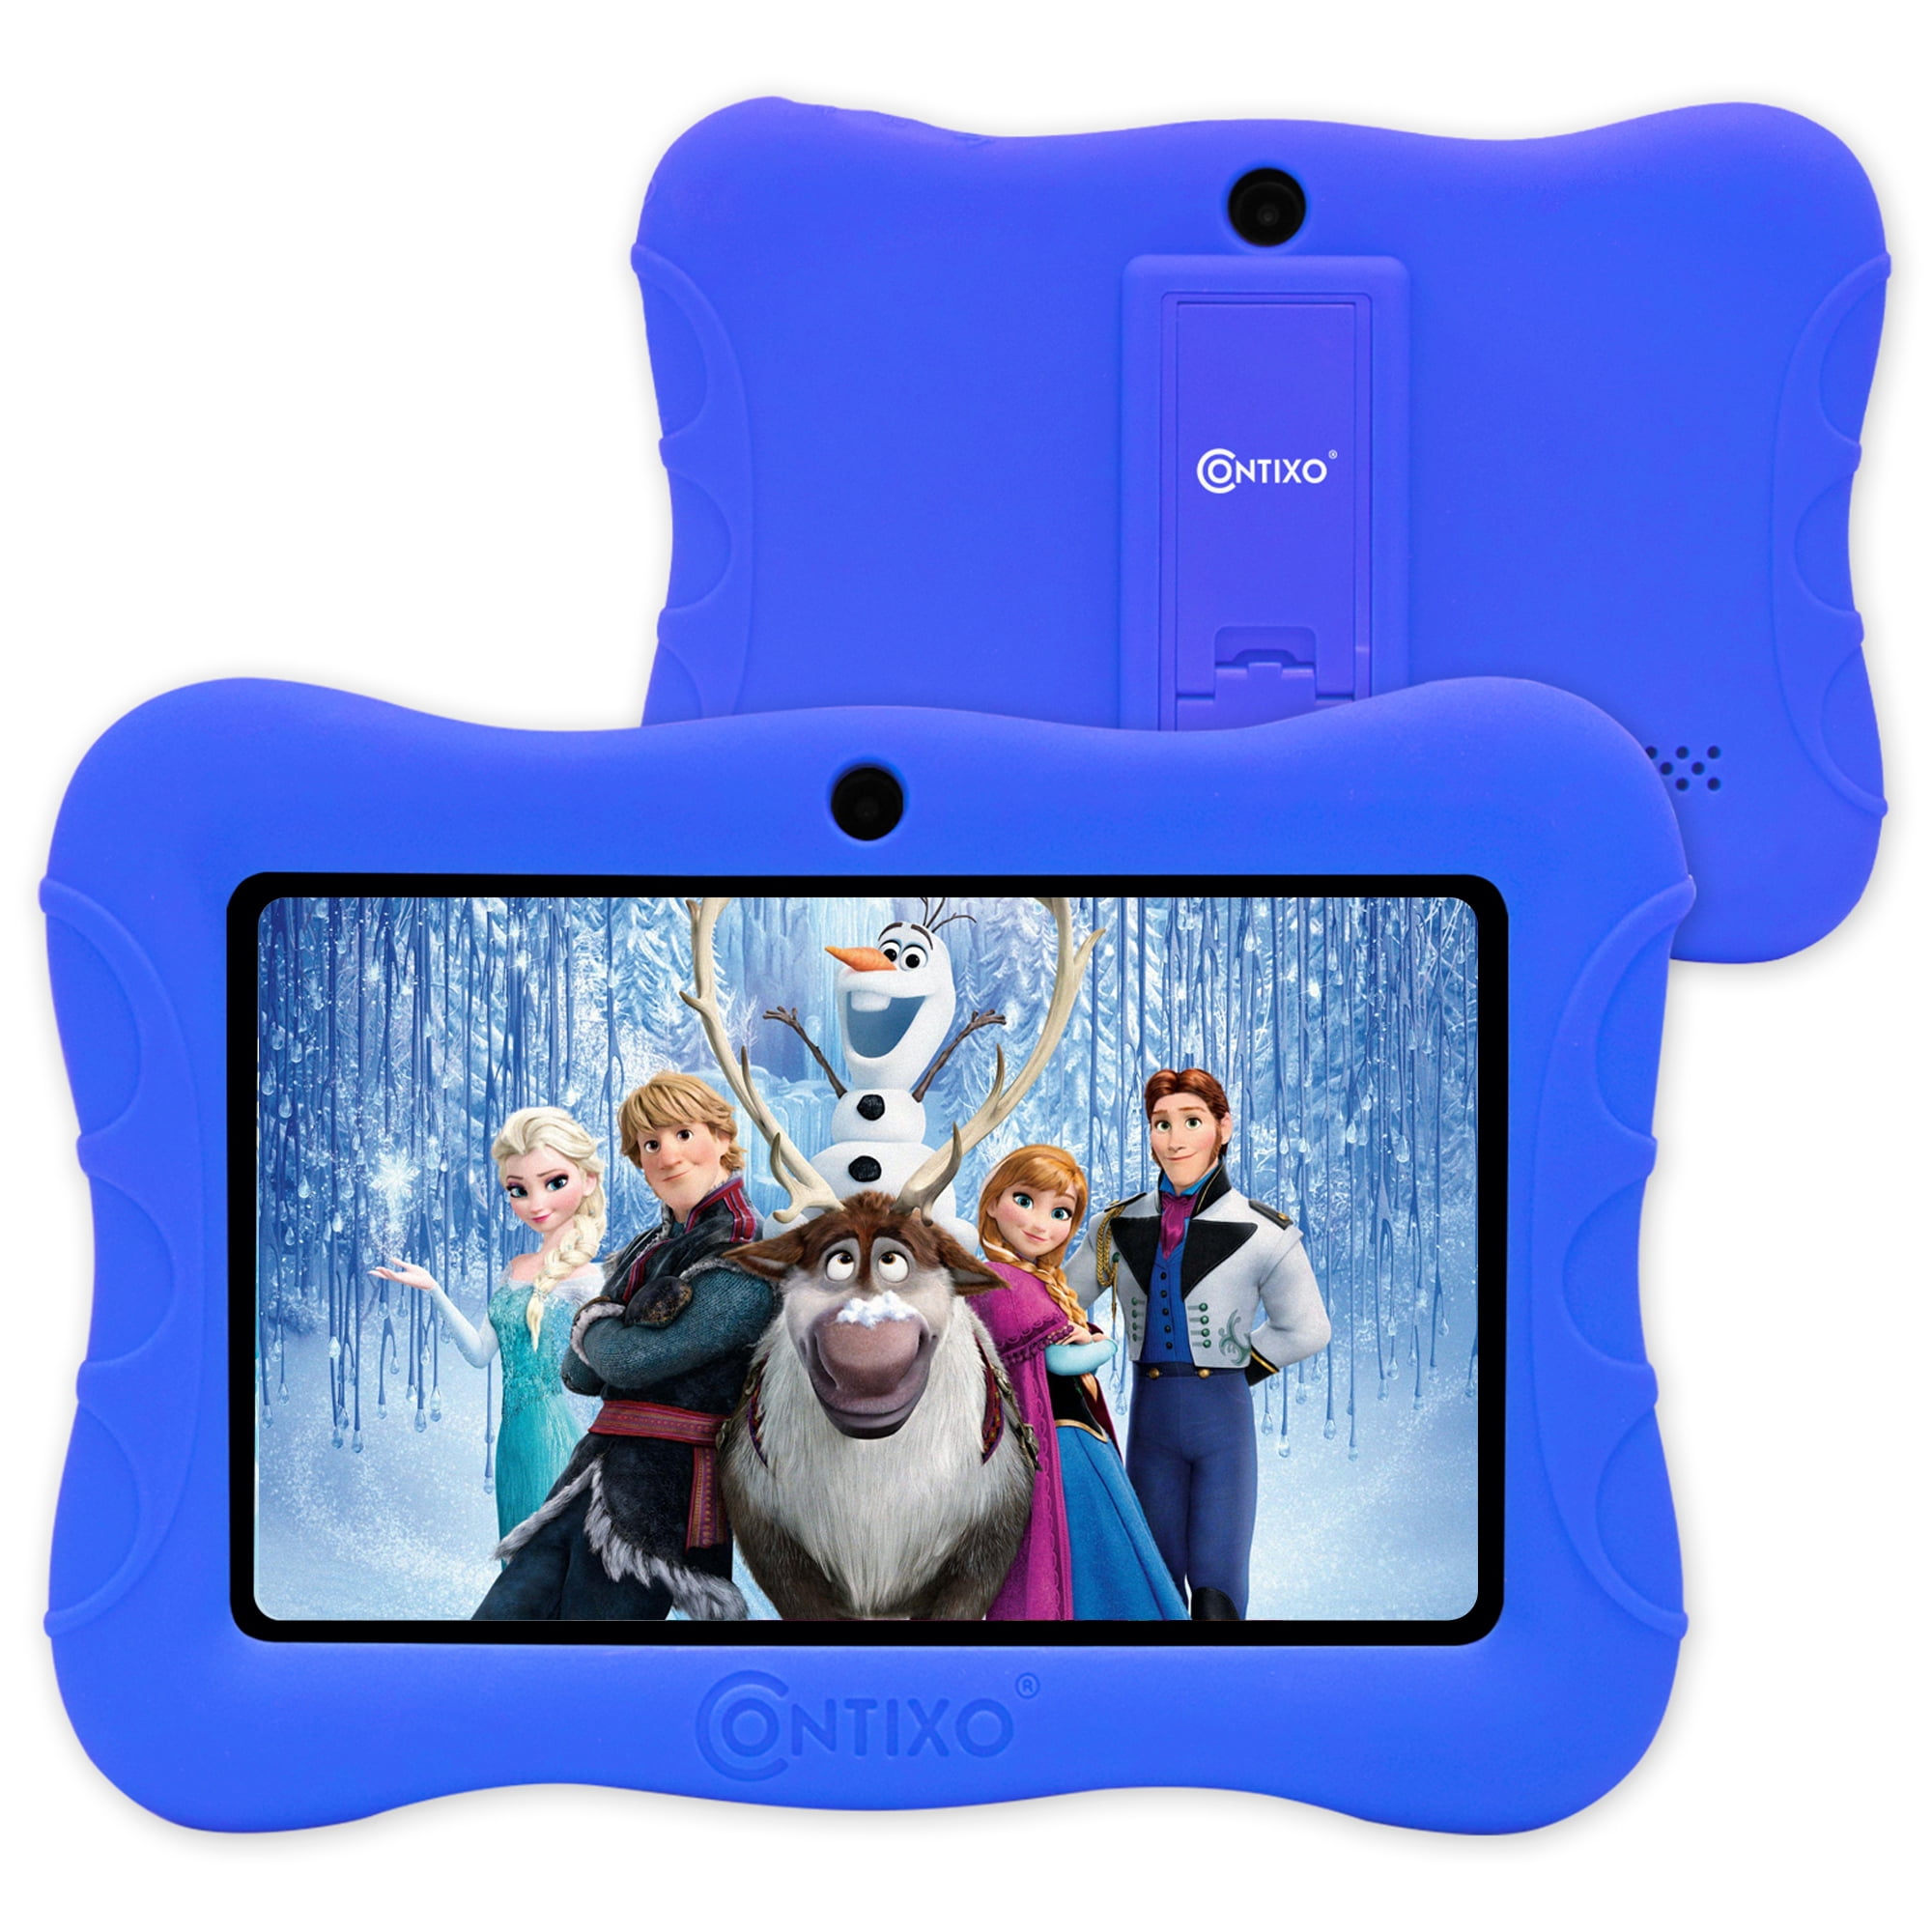 Contixo 7 inch Kids Tablet Android WiFi Camera 16GB Bluetooth Learning Tablet for Toddlers Children Kids Parental Control Pre-Installed Education Apps w/Kid-Proof Protective Case, V8-3-ST Dark Blue